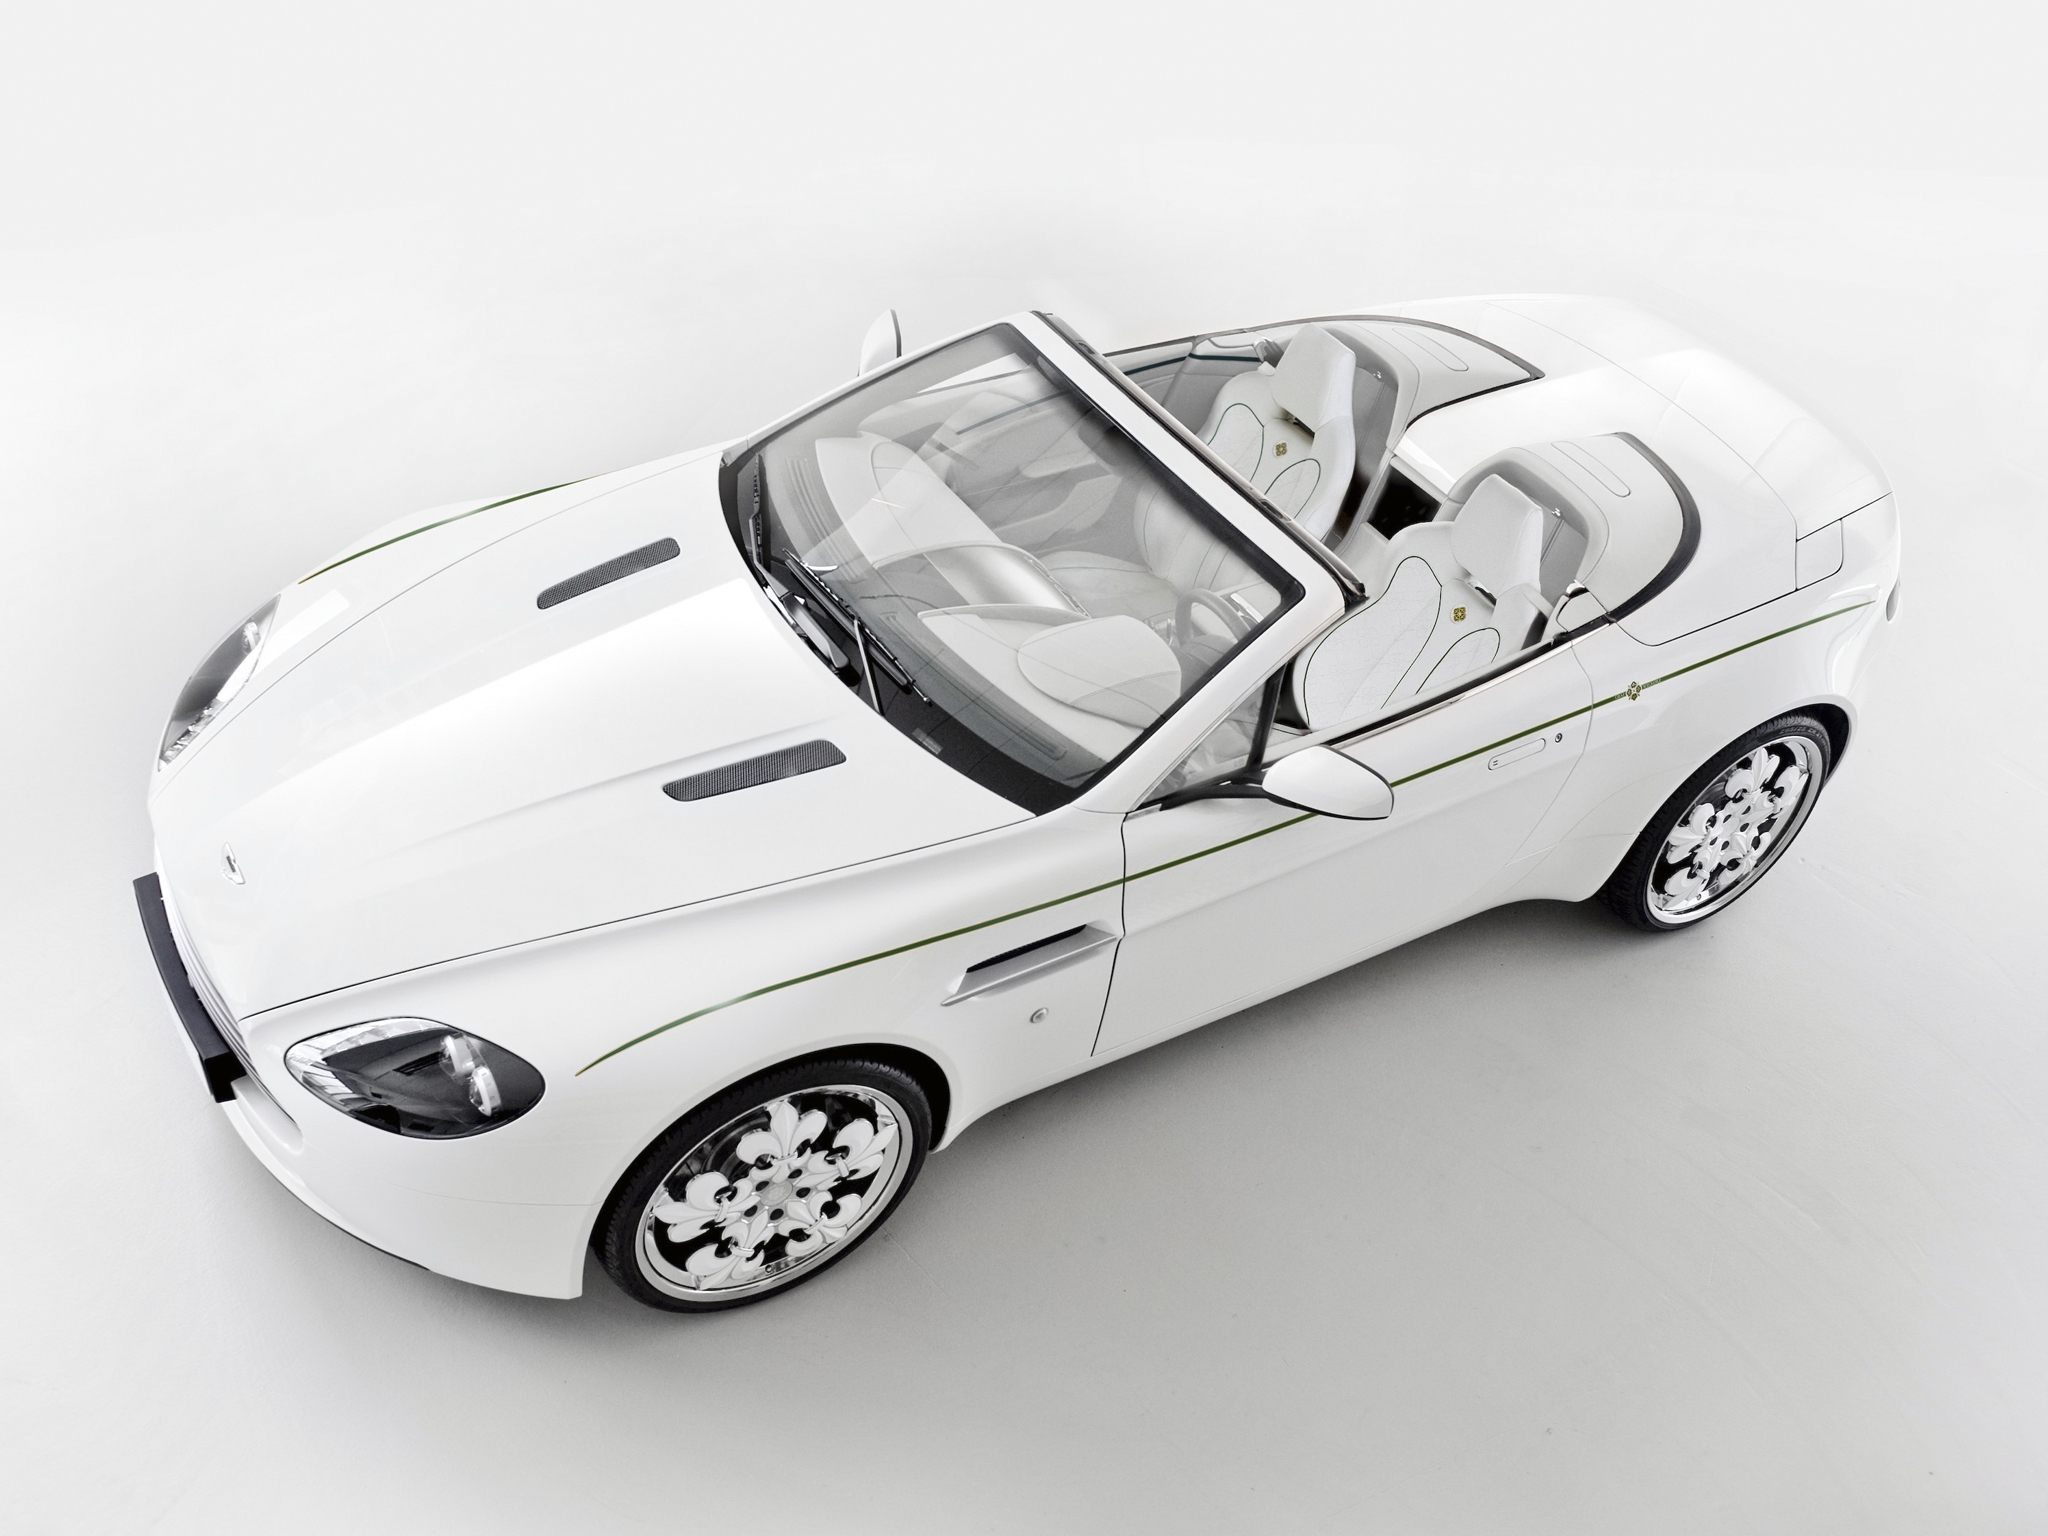 aston martin, cars, white, view from above, style, cabriolet, 2010, v8, vantage lock screen backgrounds